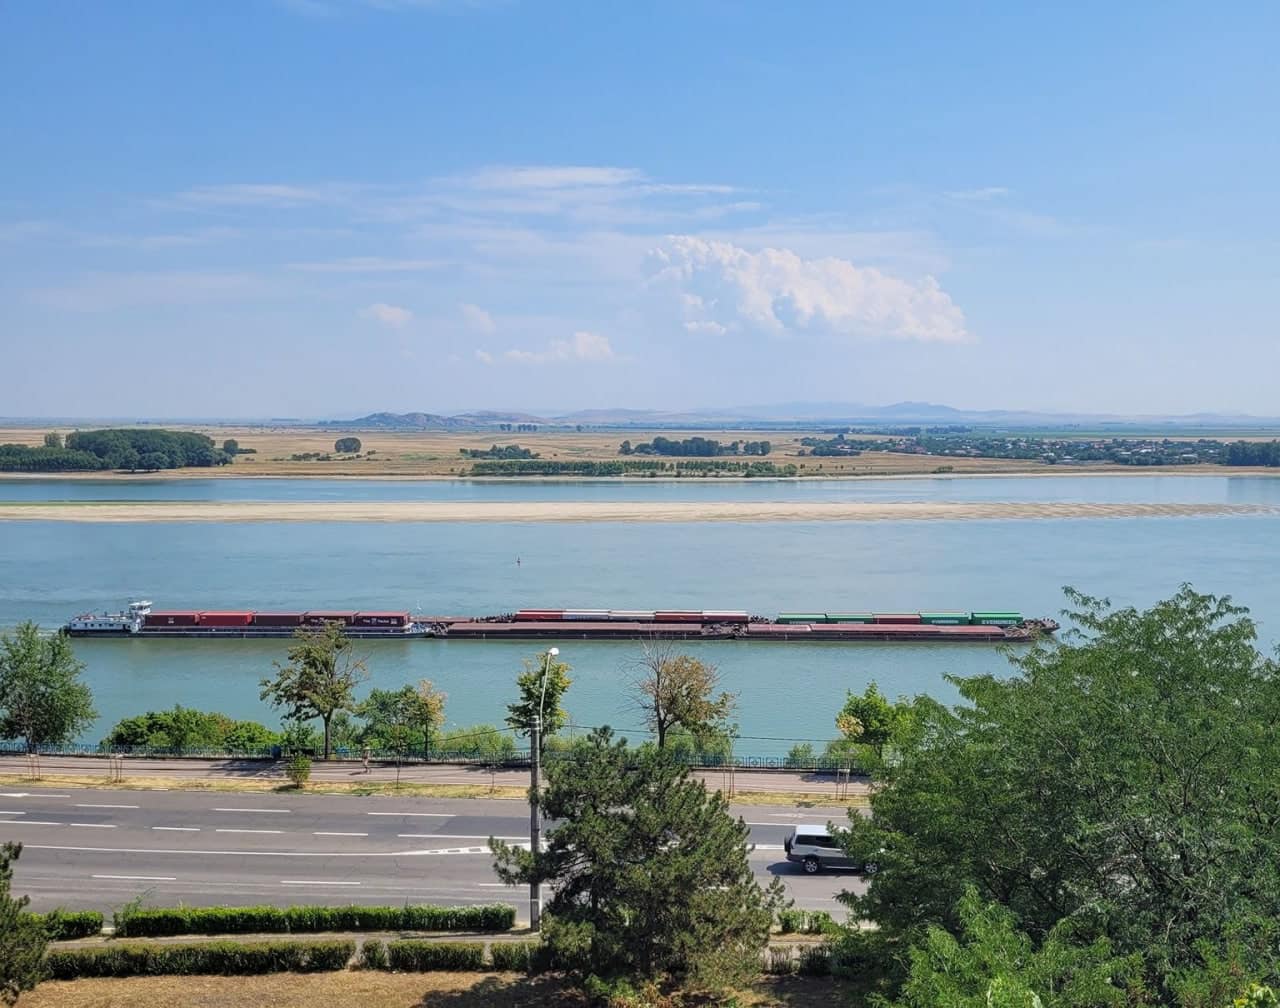 The "Danube Grain Route" project is being launched in Ukraine